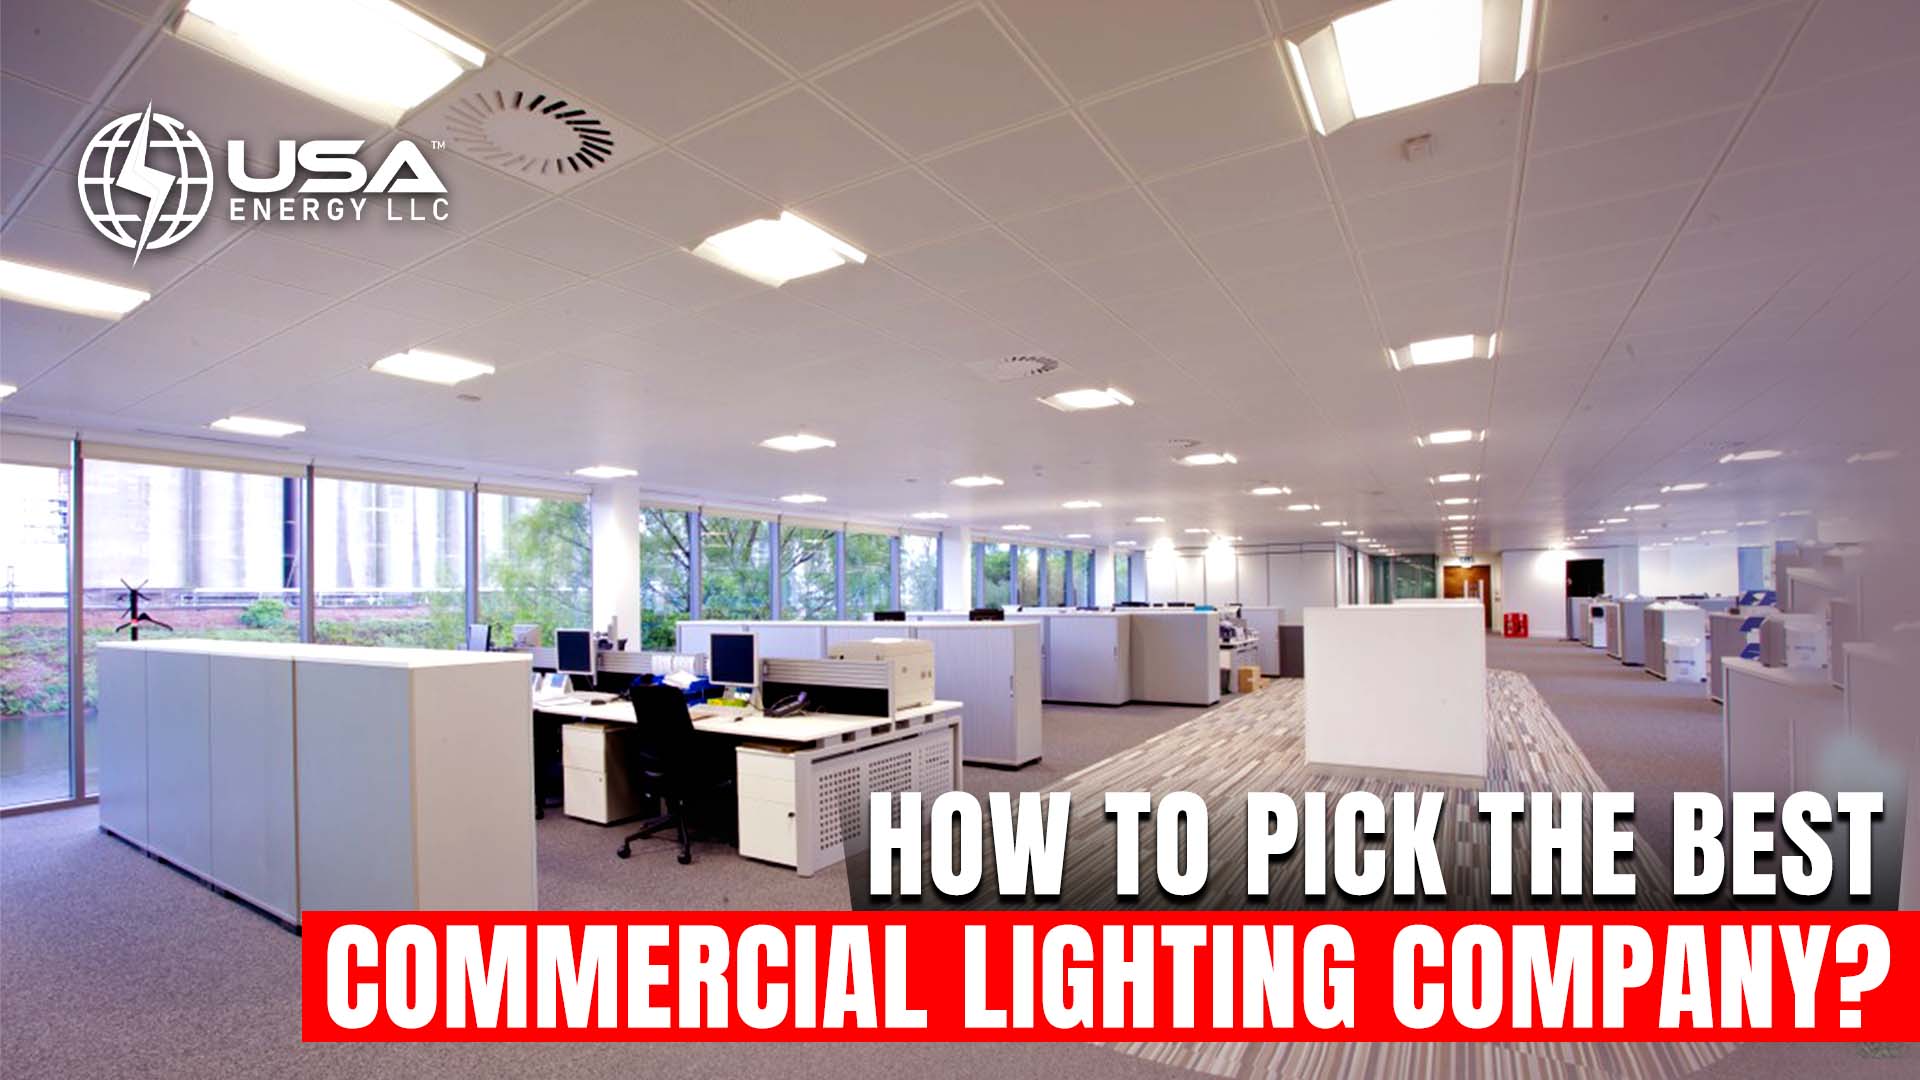 How to Pick the Best Commercial Lighting Company